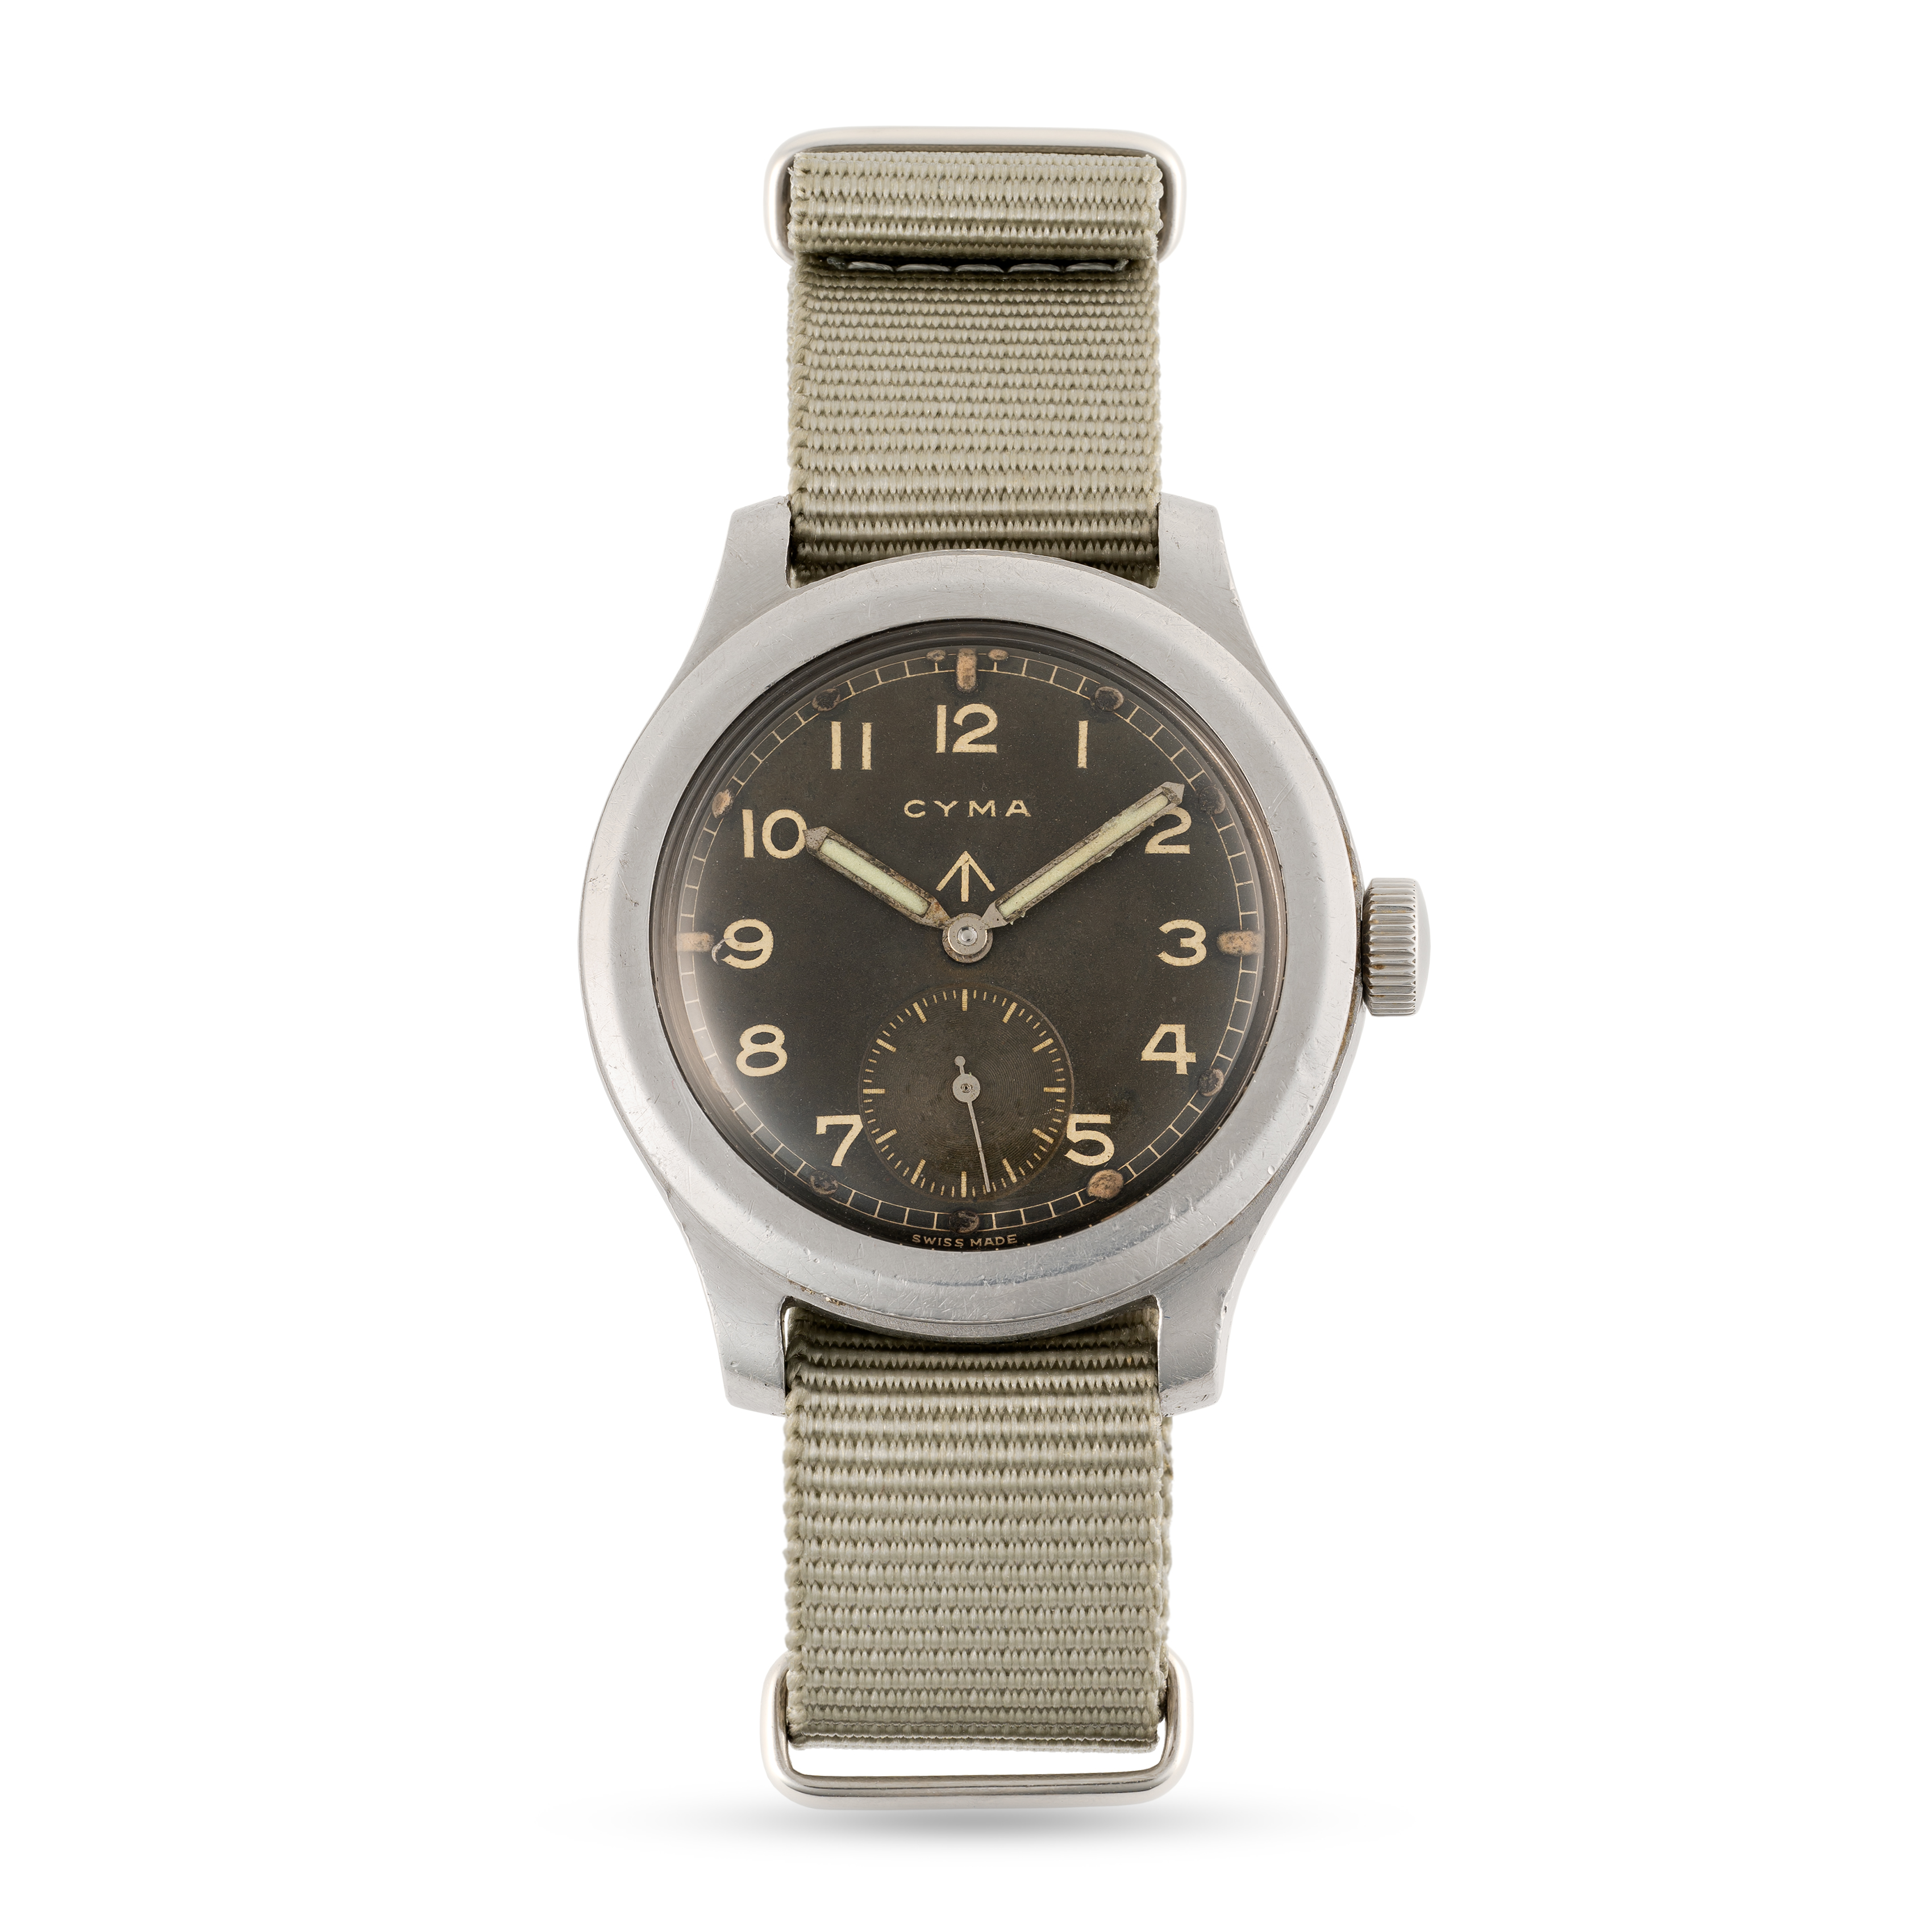 A GENTLEMAN'S STAINLESS STEEL BRITISH MILITARY CYMA W.W.W. WRIST WATCH CIRCA 1945, PART OF THE " - Image 2 of 8